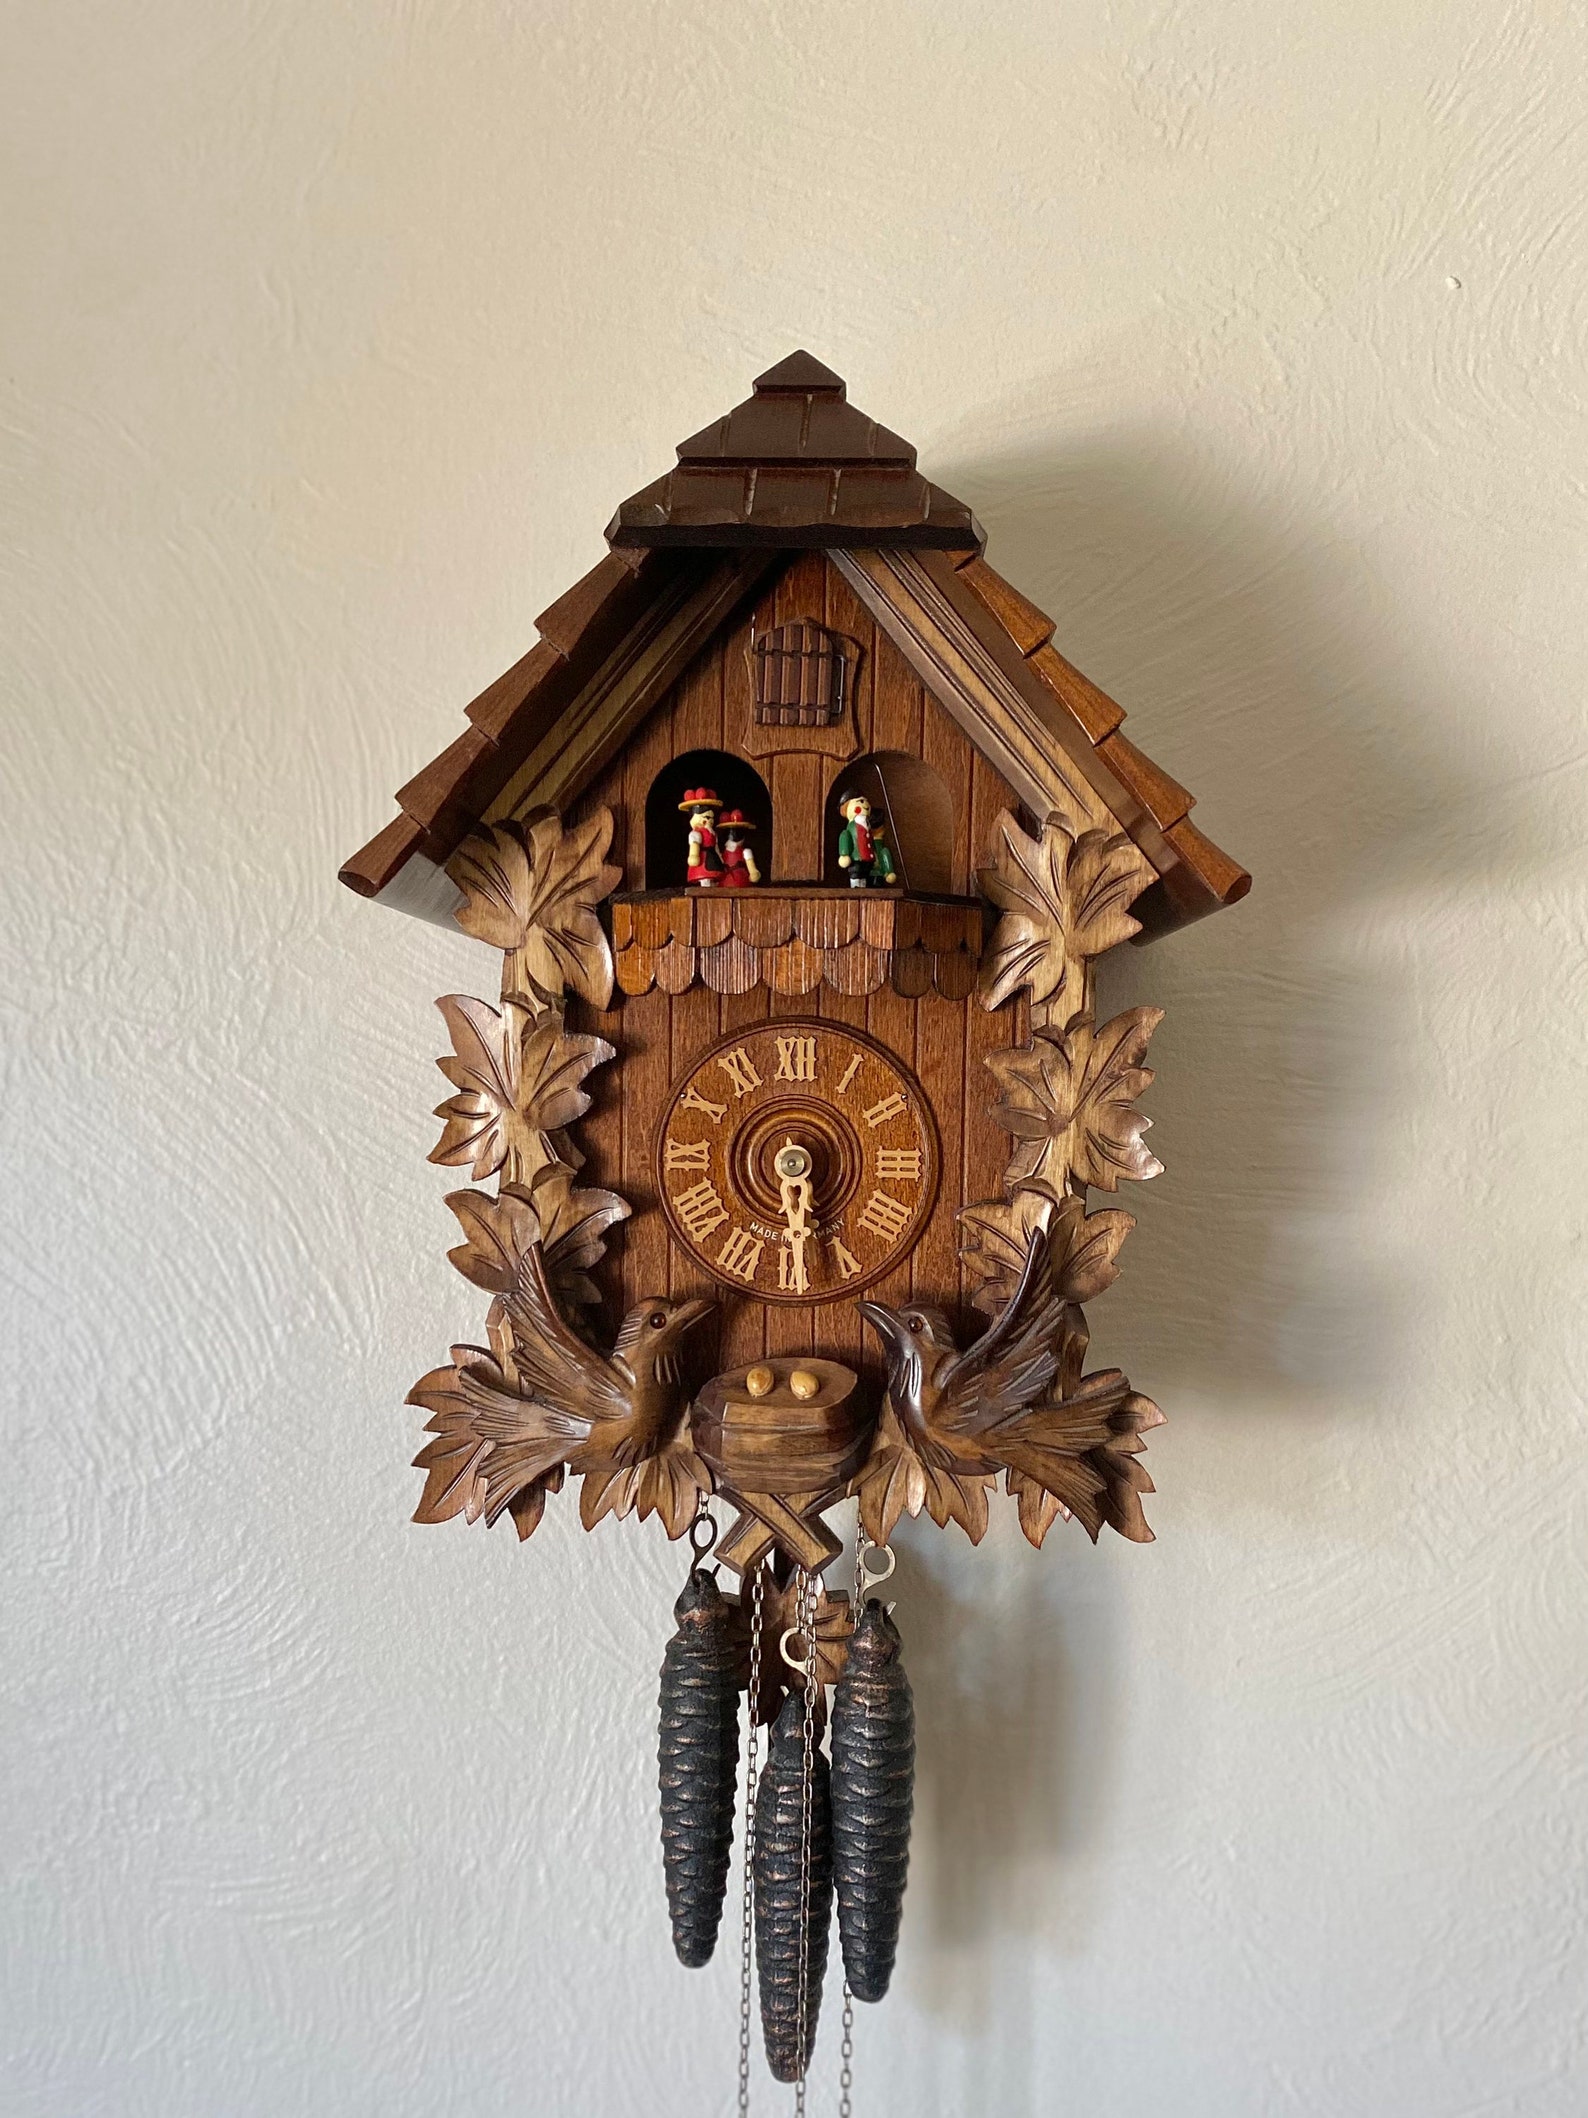 Working! Vintage, Musical “Birds in the Nest” style cuckoo clock, made in Black Forest Germany. Nighttime shut off! 1 yr limited warranty!!